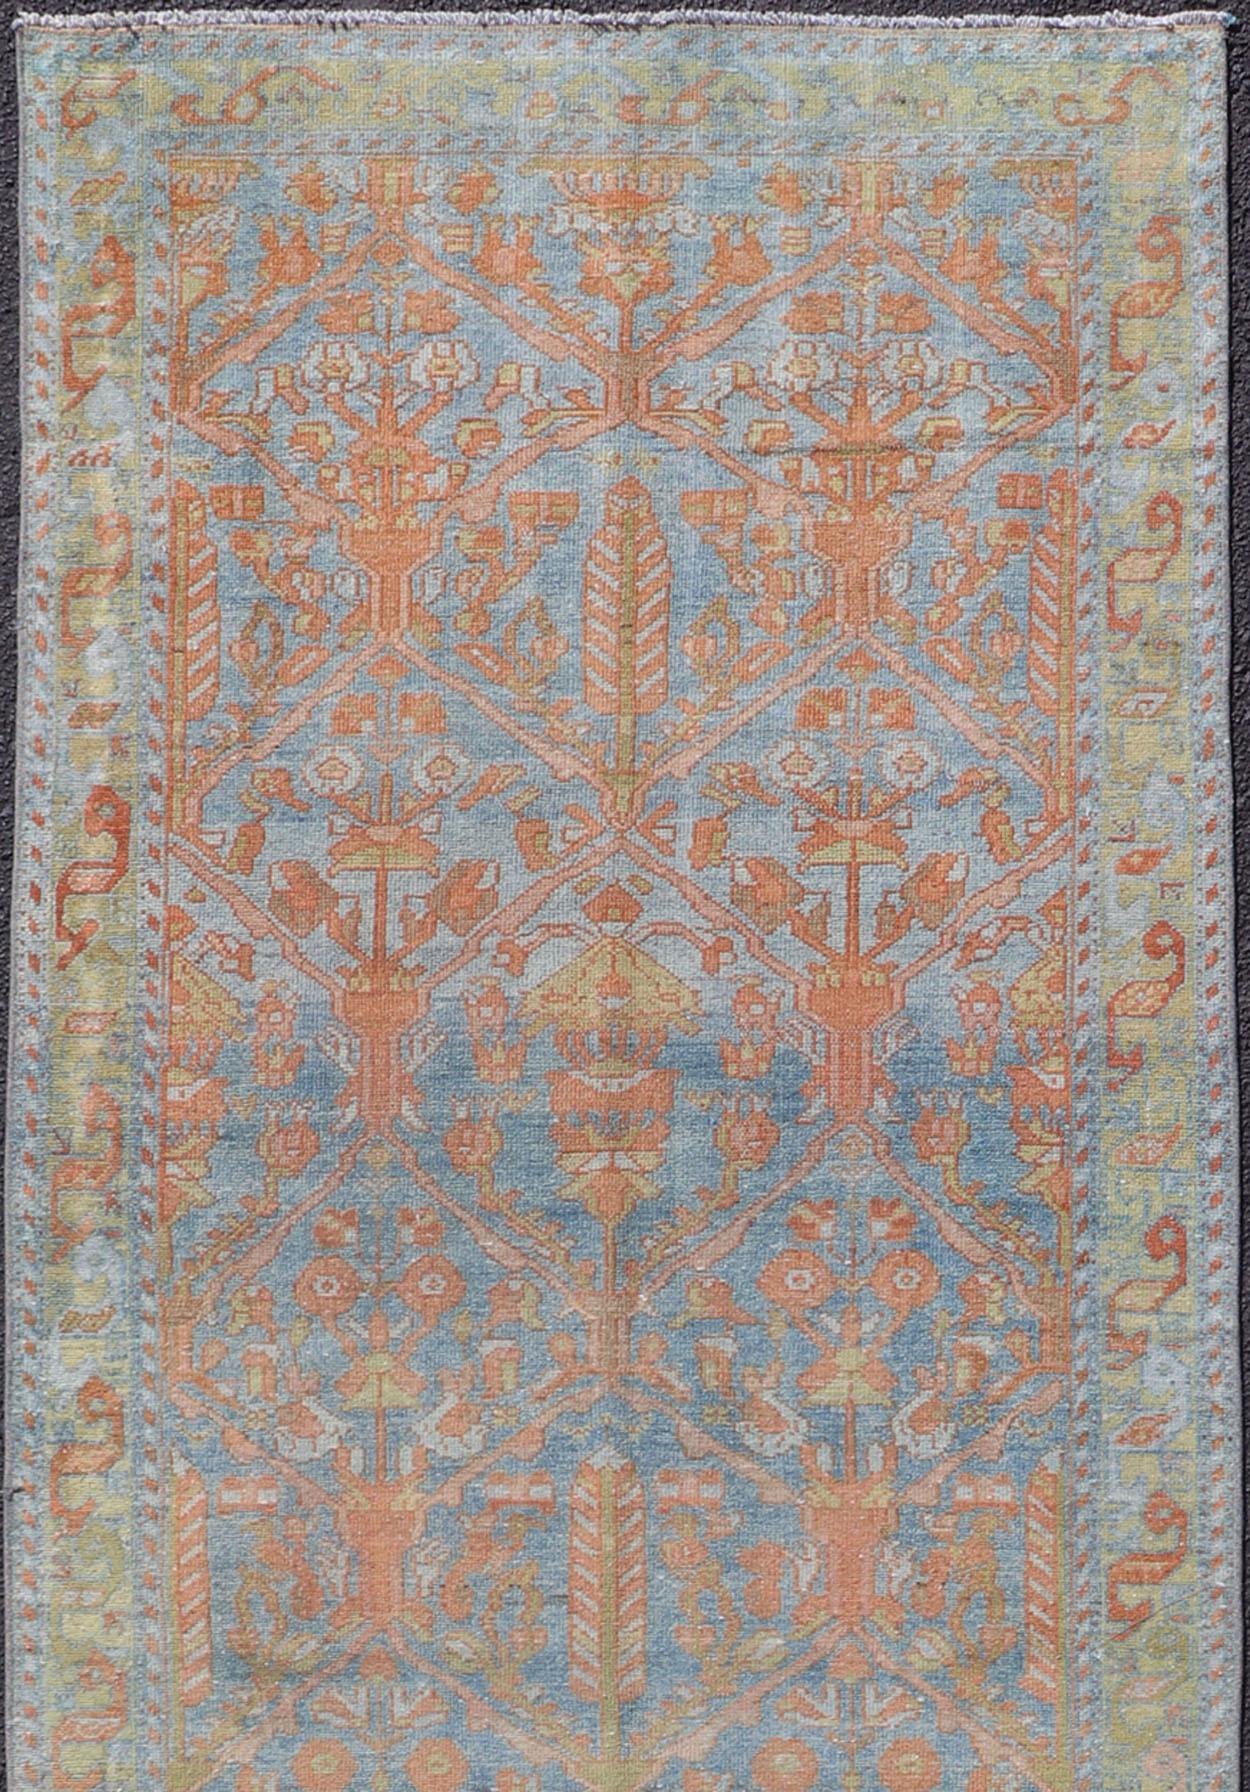 Colorful Floral Geometric Persian Malayer antique runner with all-over design, Keivan Woven Arts-rug SUS-2012-820, country of origin / type: Iran / Malayer, circa 1920.

This antique Persian Malayer runner, circa early 20th century, relies heavily